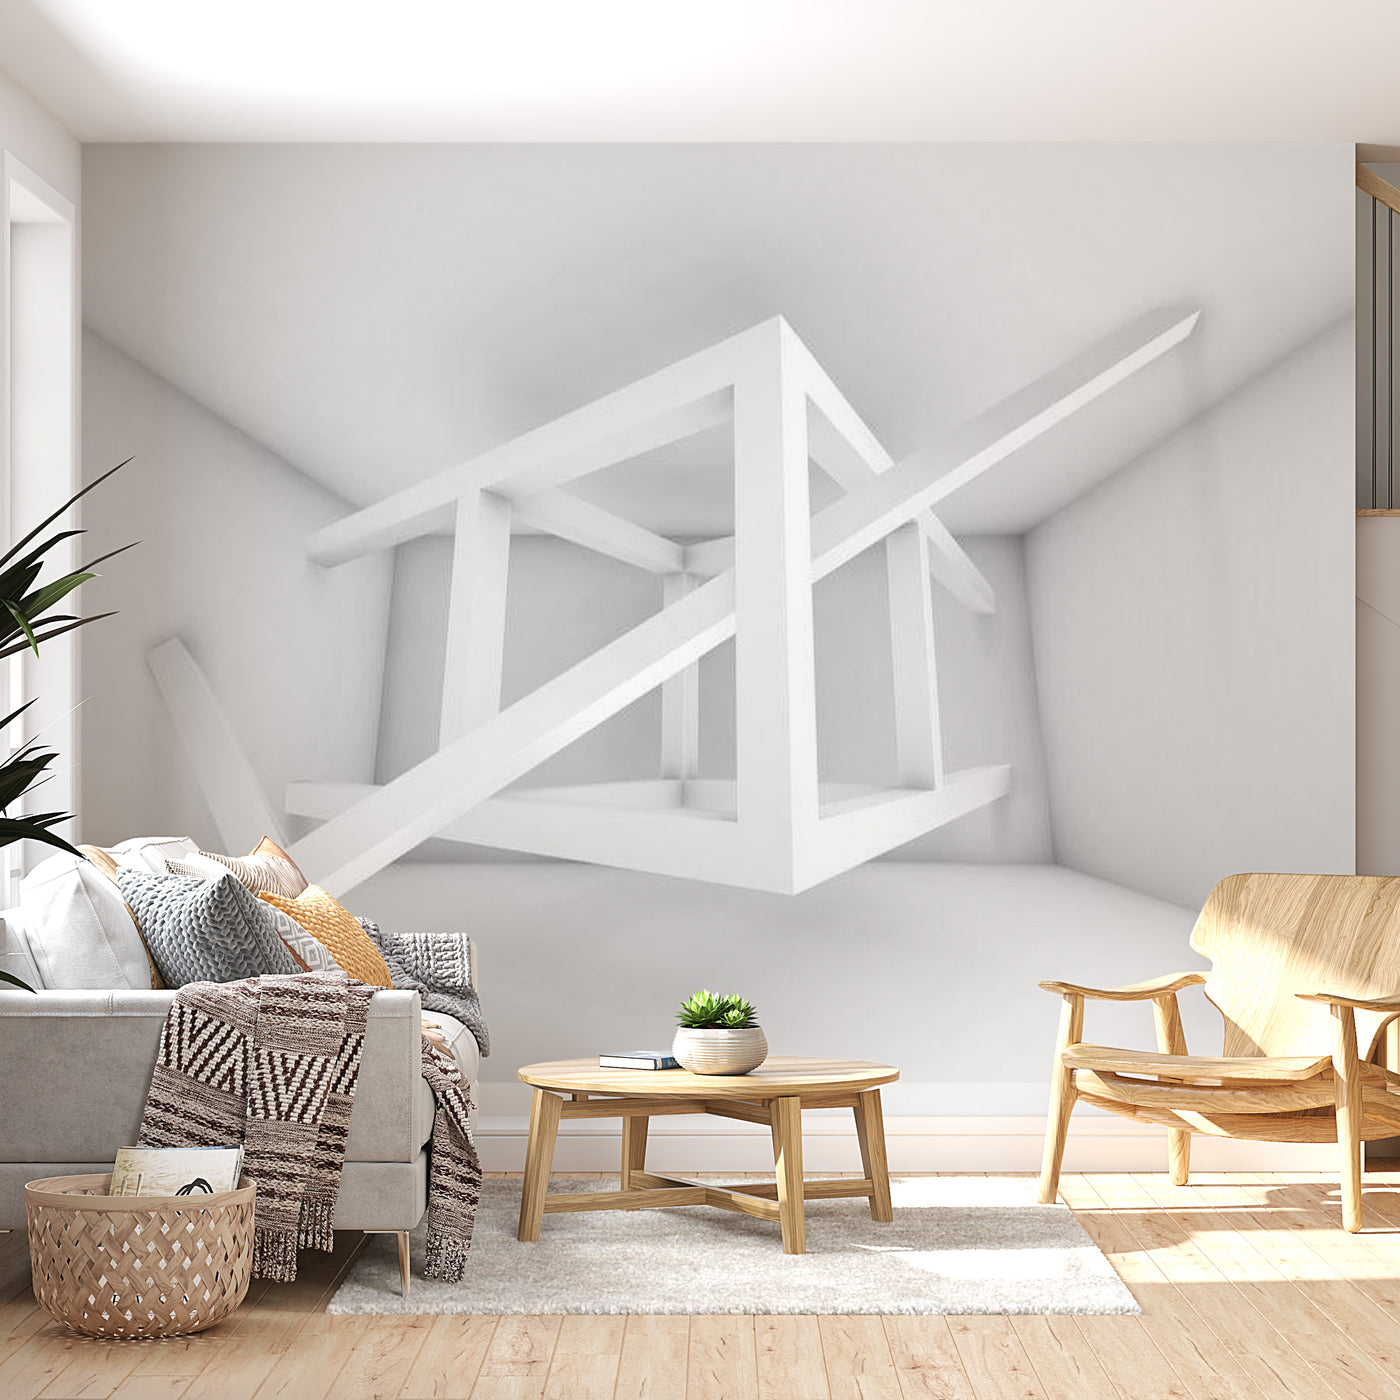 Peel & Stick 3D Illusion Wall Mural - Alabaster Composition - Removable Wall Decals